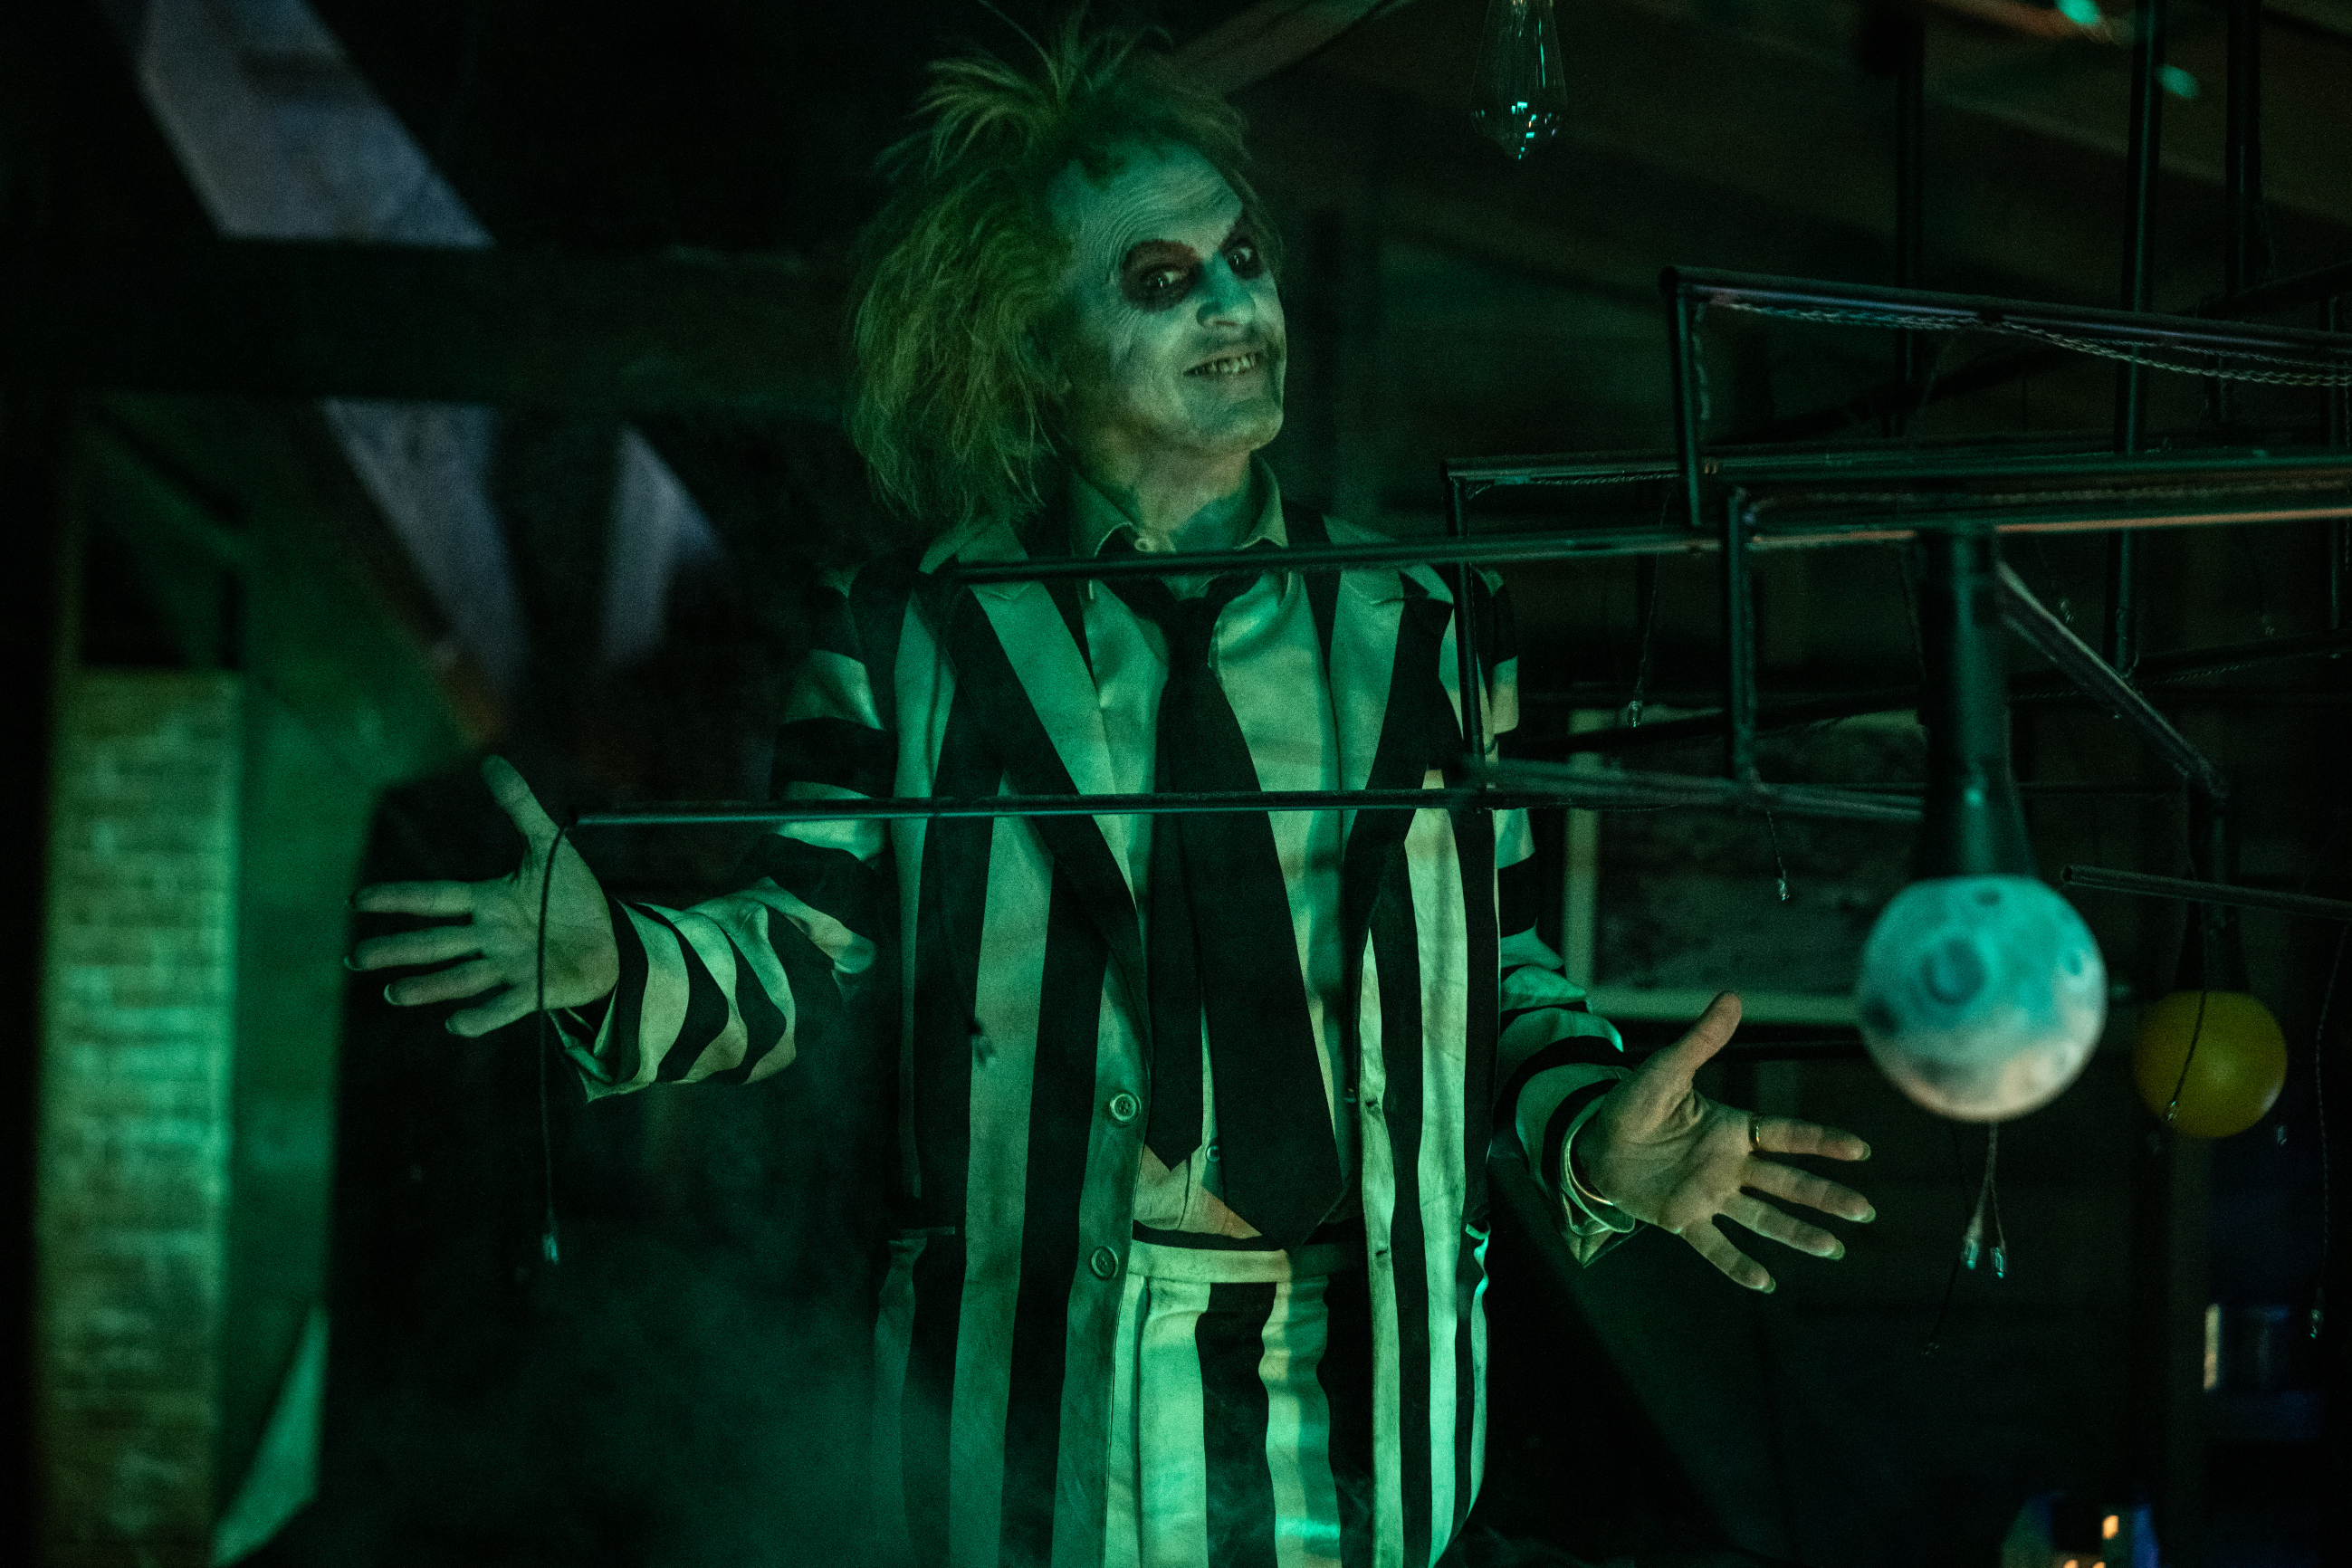 Person costumed as Beetlejuice with striped suit and wild hair extending arms